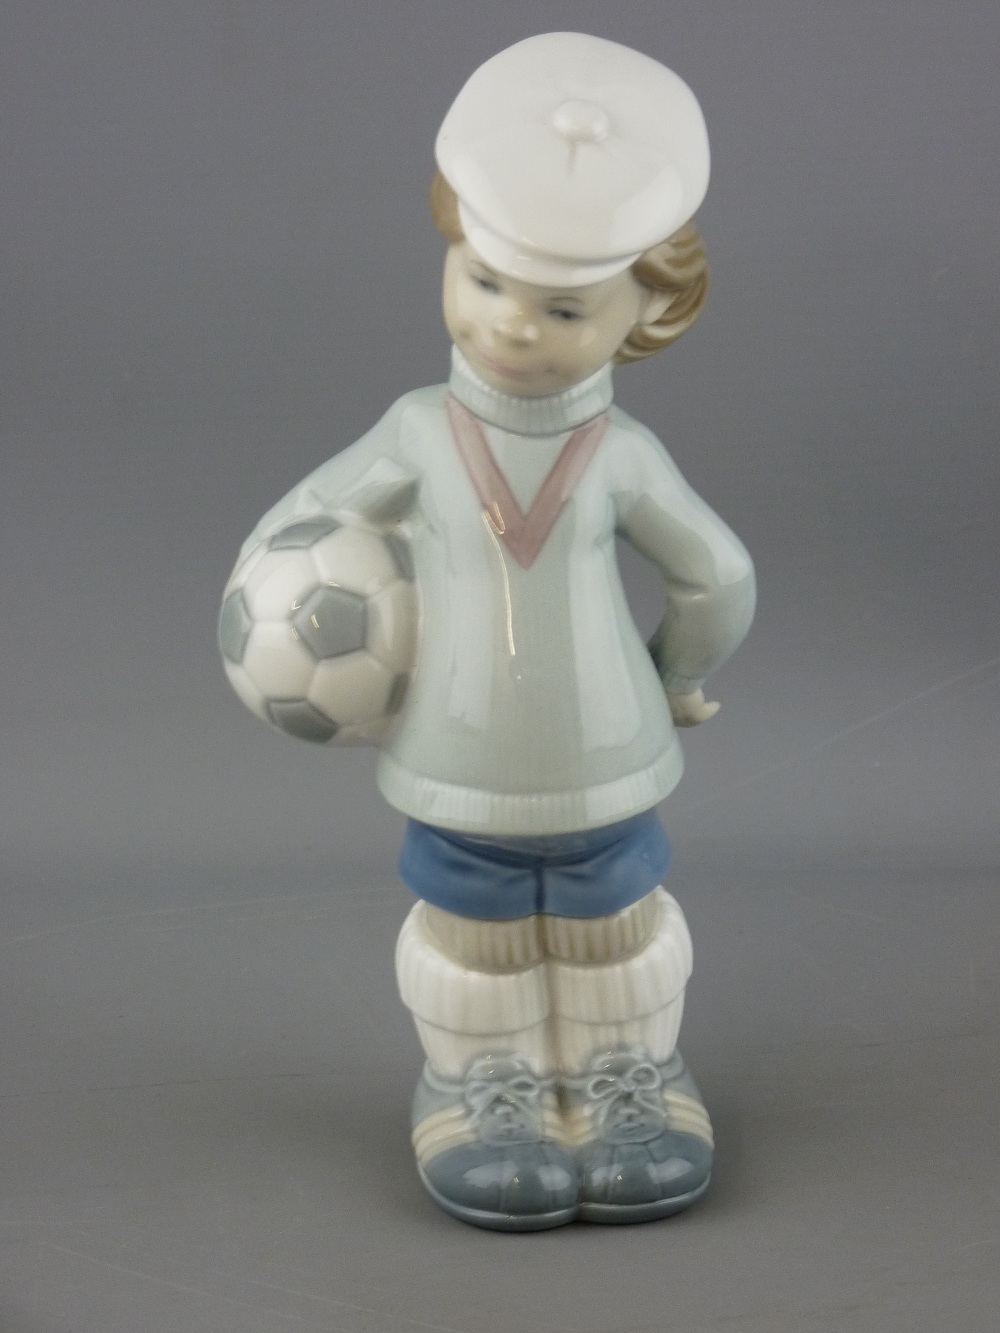 Lladro porcelain figurines of a young boy with football